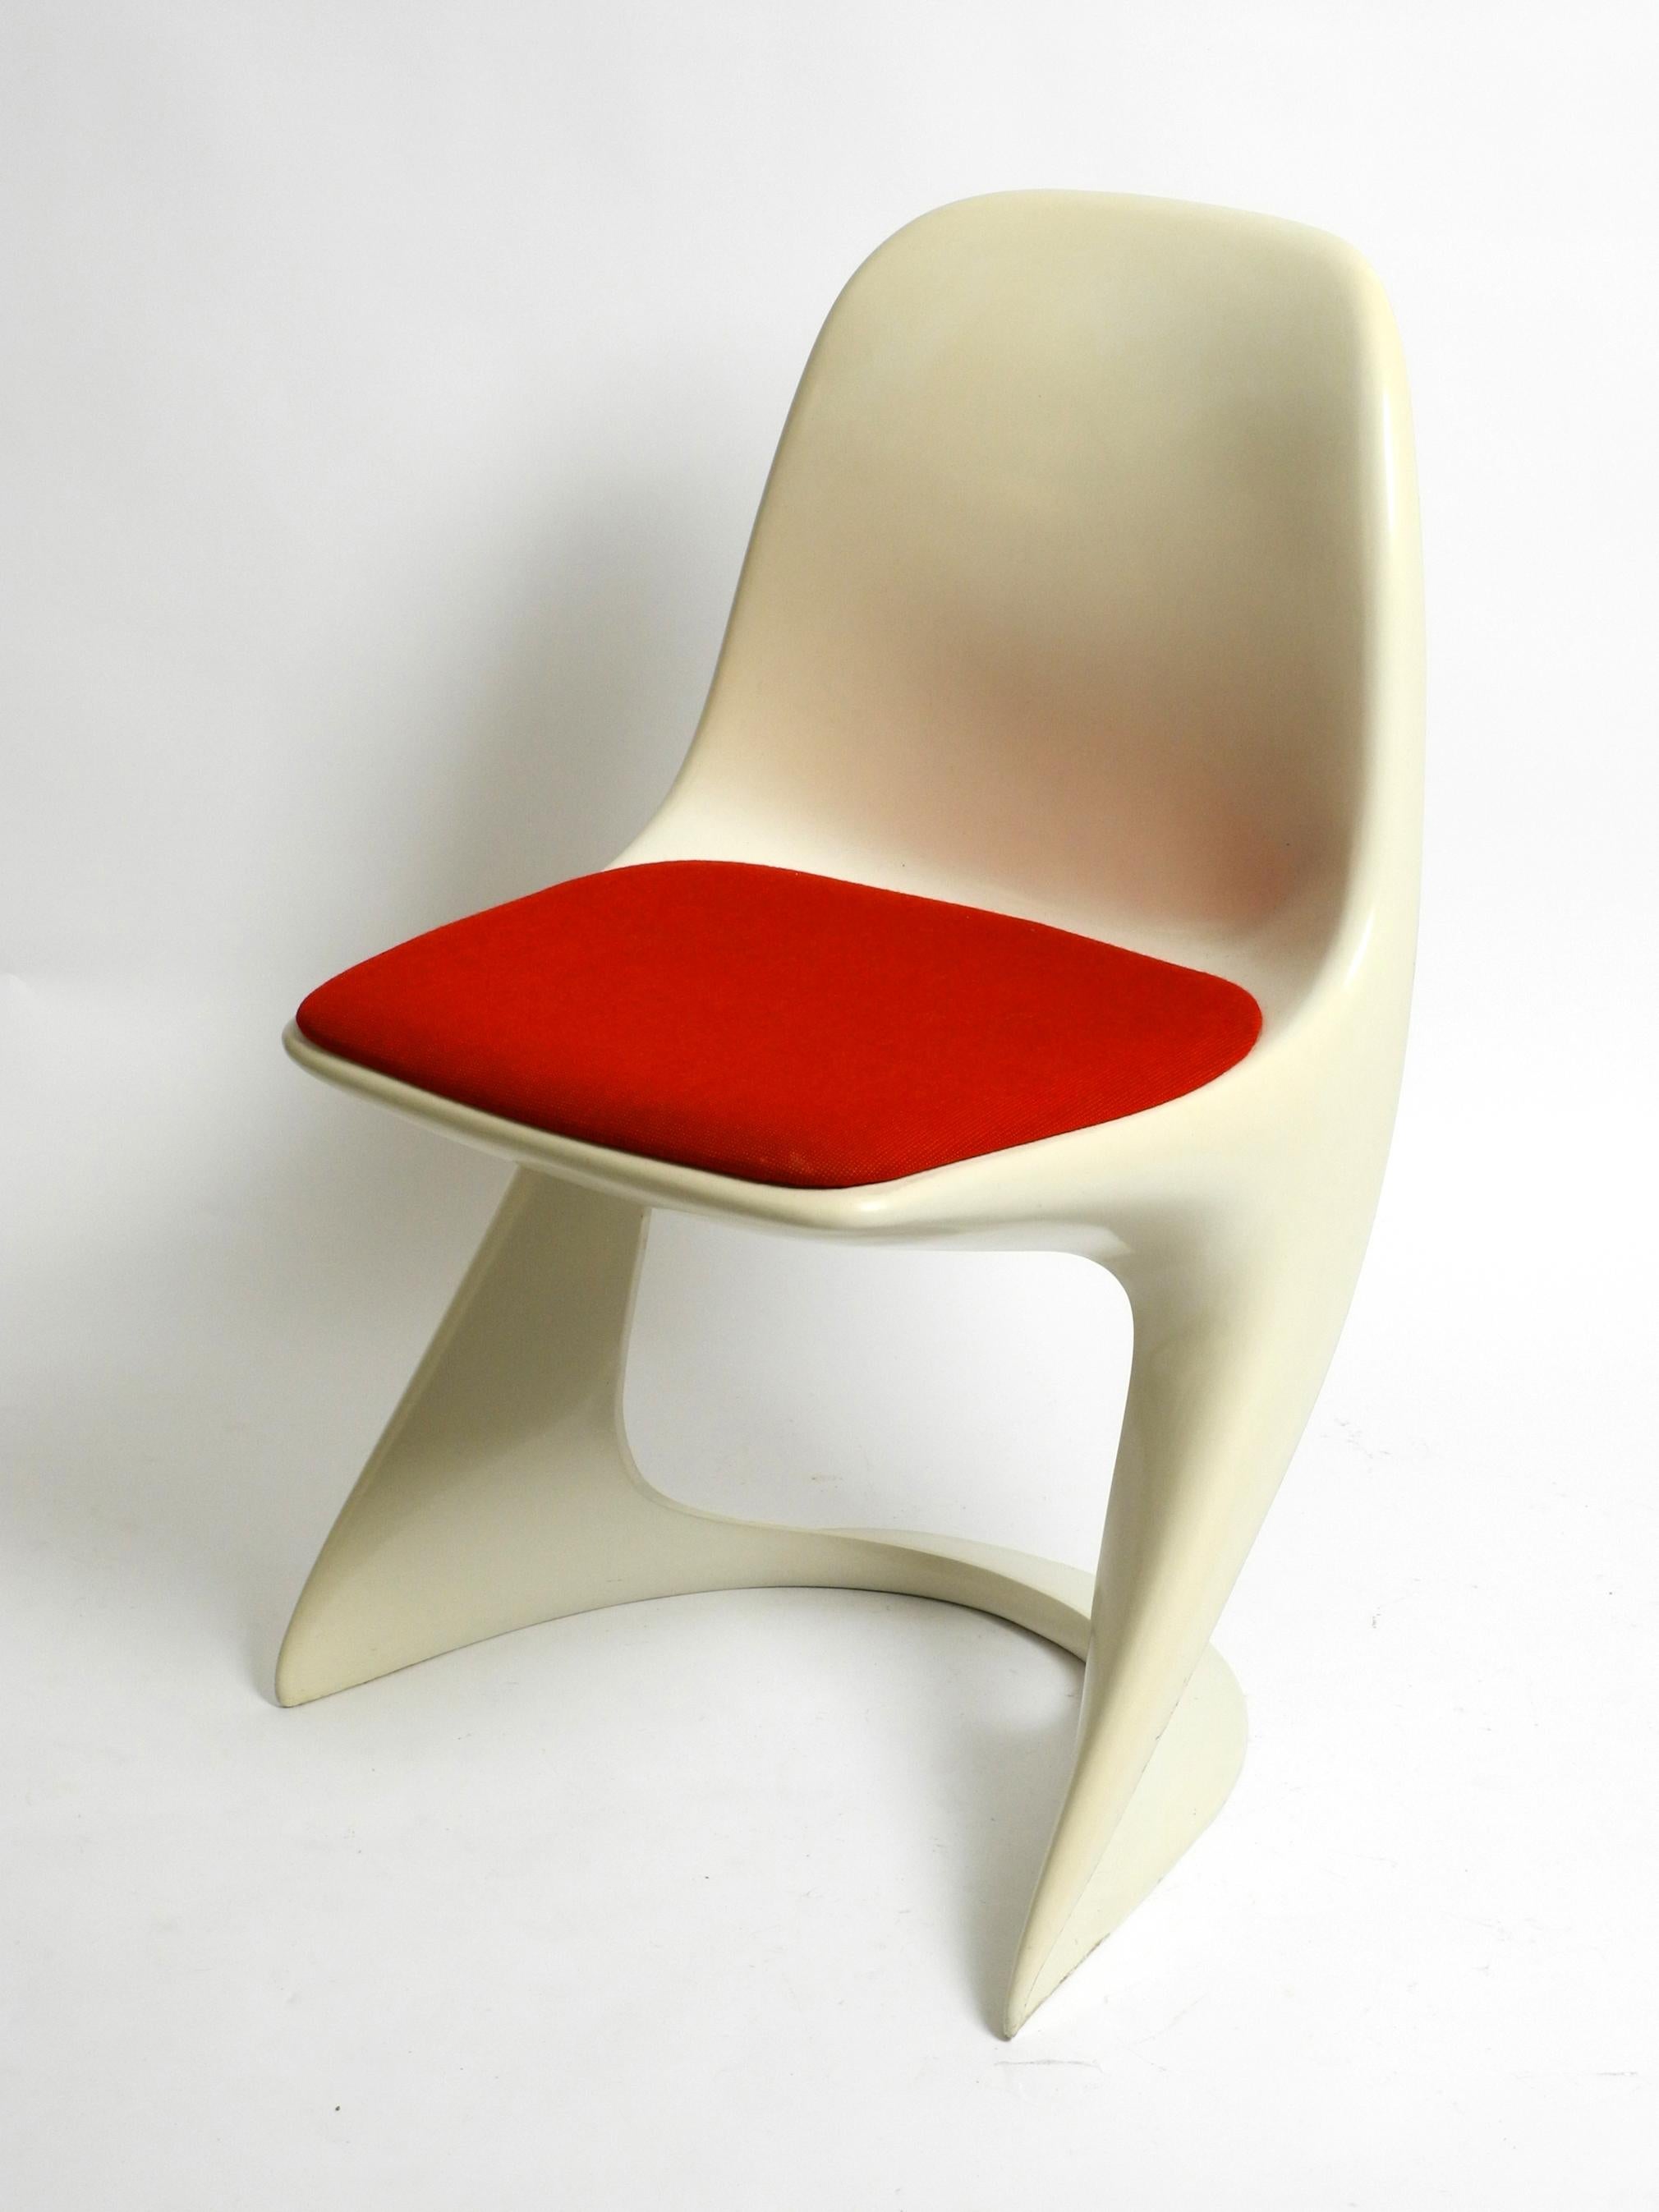 Space Age Casala Chair Model 2001/2002 from the 1970s with Original Red Fabric Upholstery